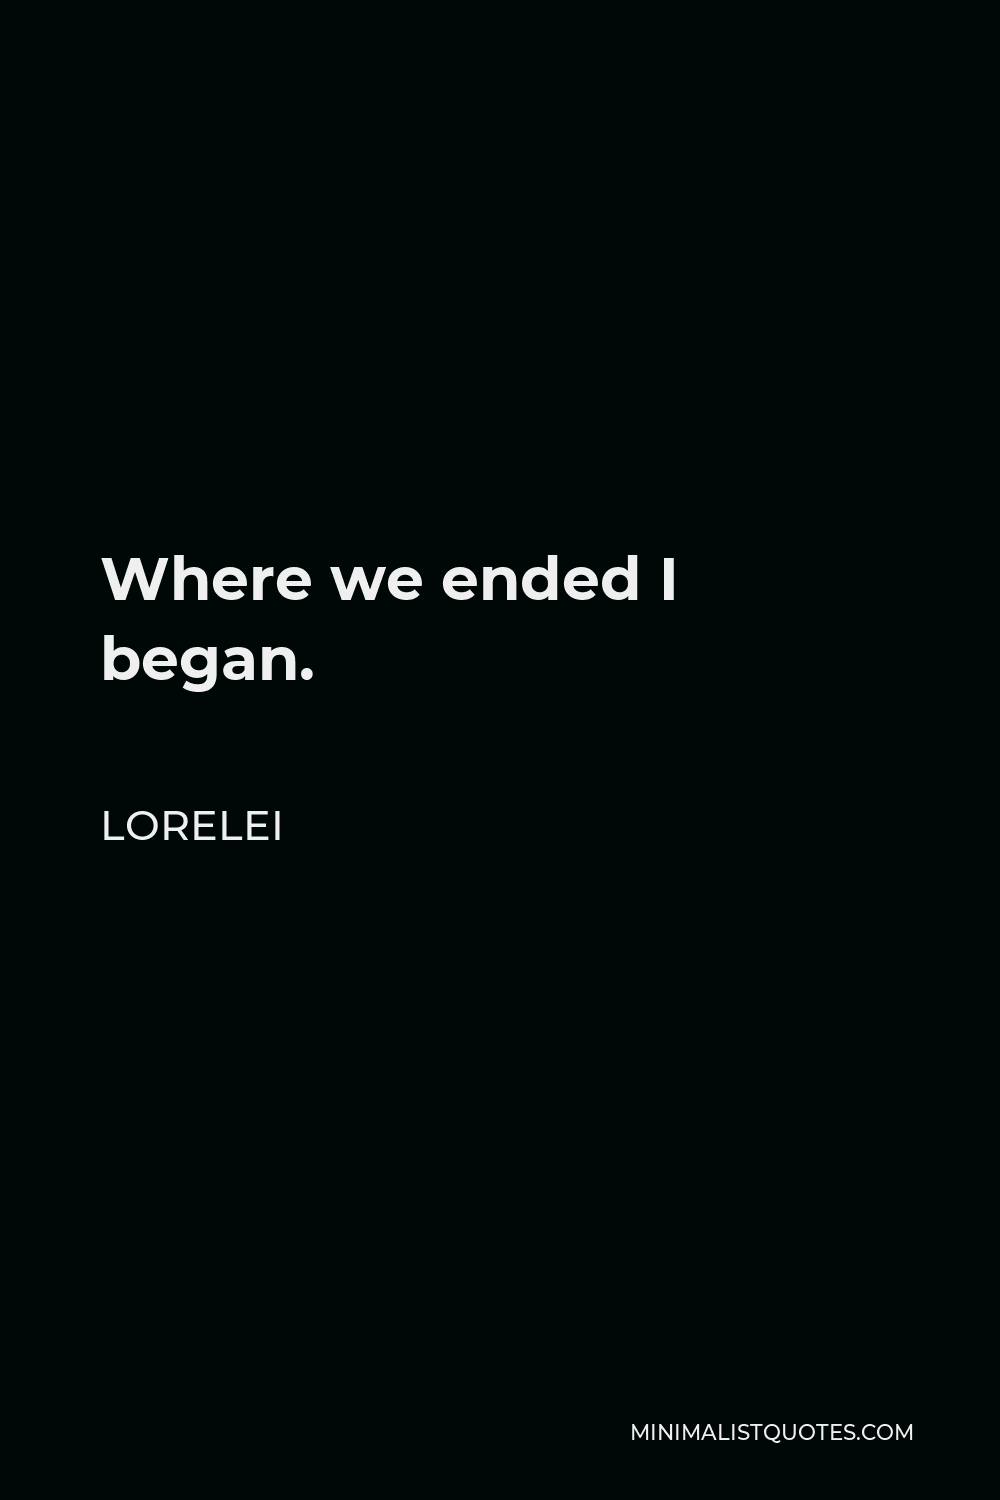 Lorelei Quote - Where we ended I began.